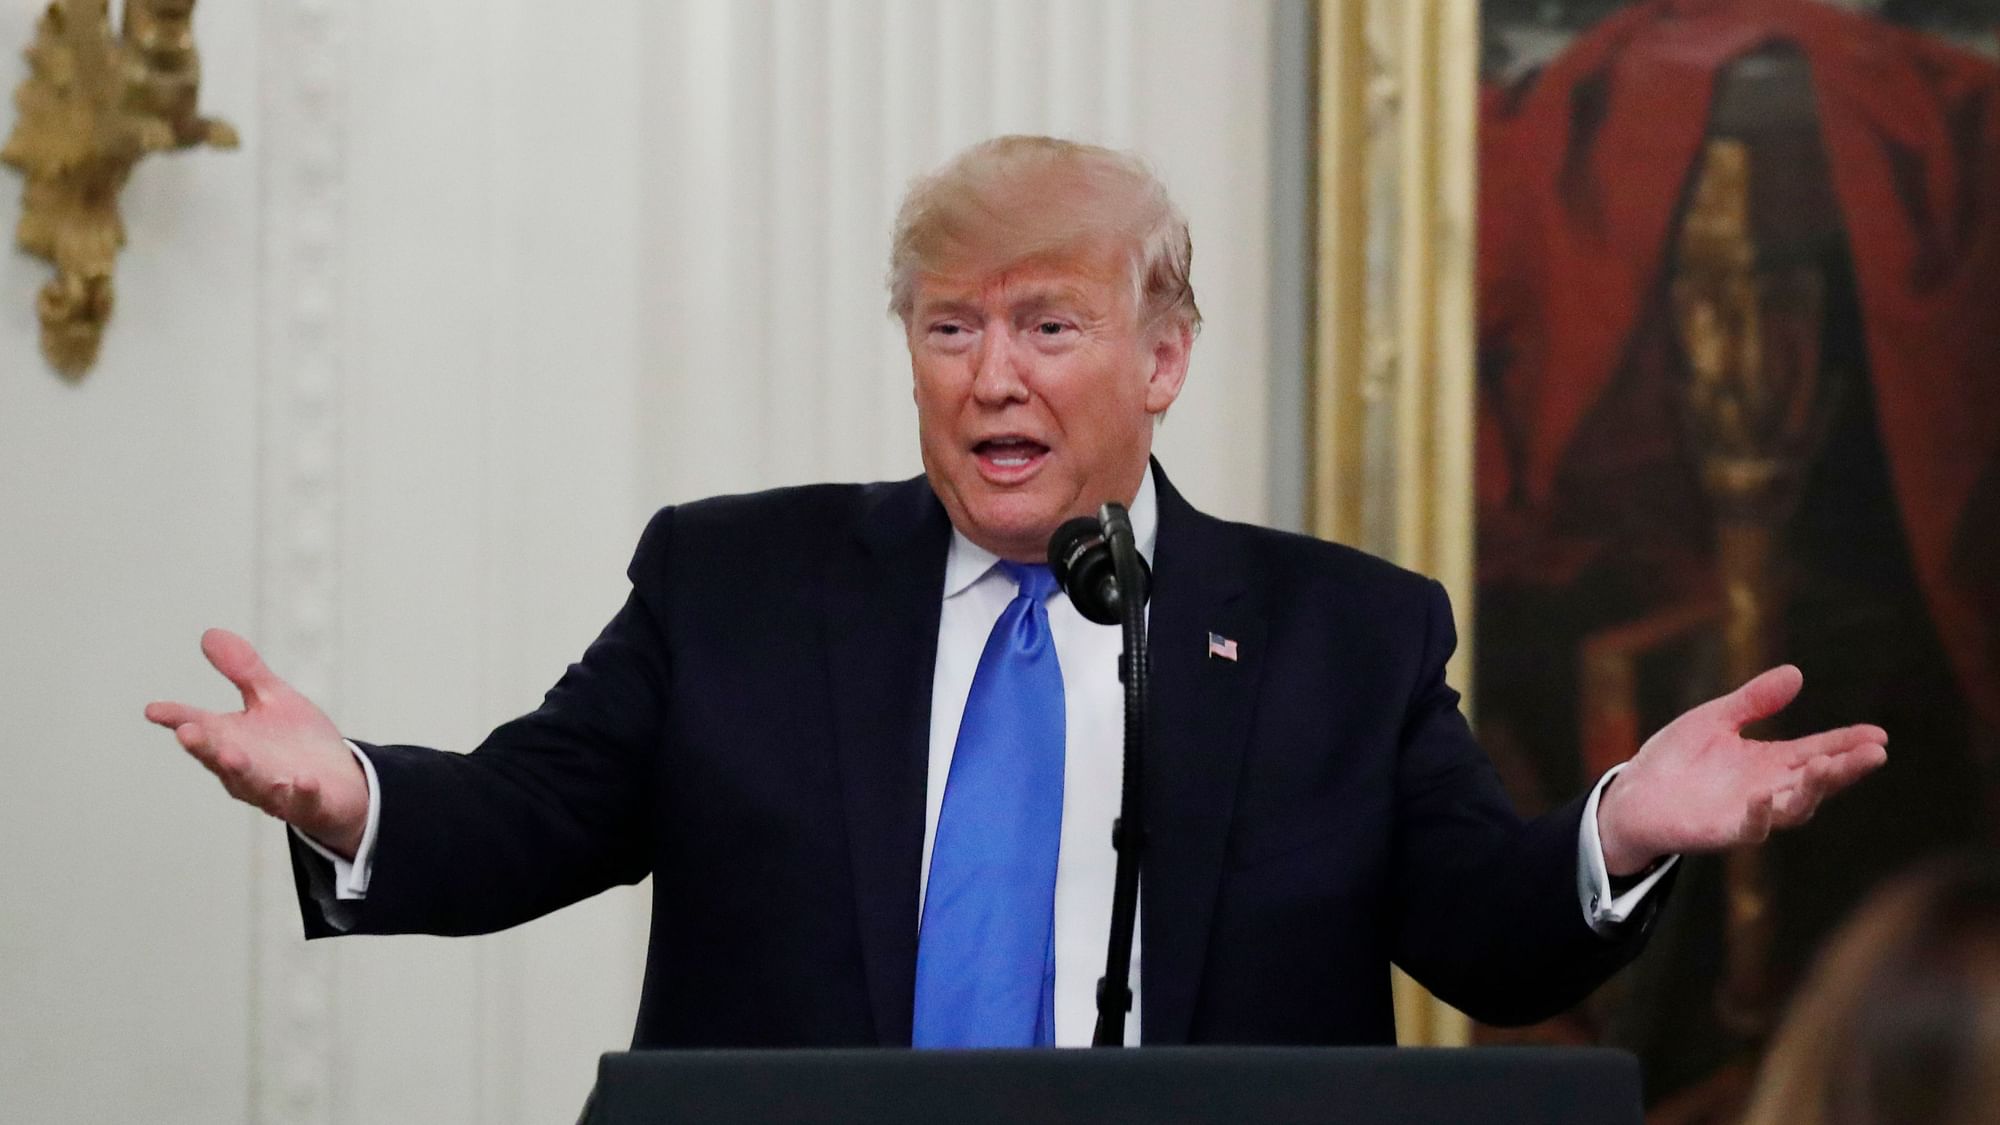 “If it weren’t for me, Hong Kong would have been obliterated in 14 minutes,” Trump said in a scattershot early morning interview with Fox News.